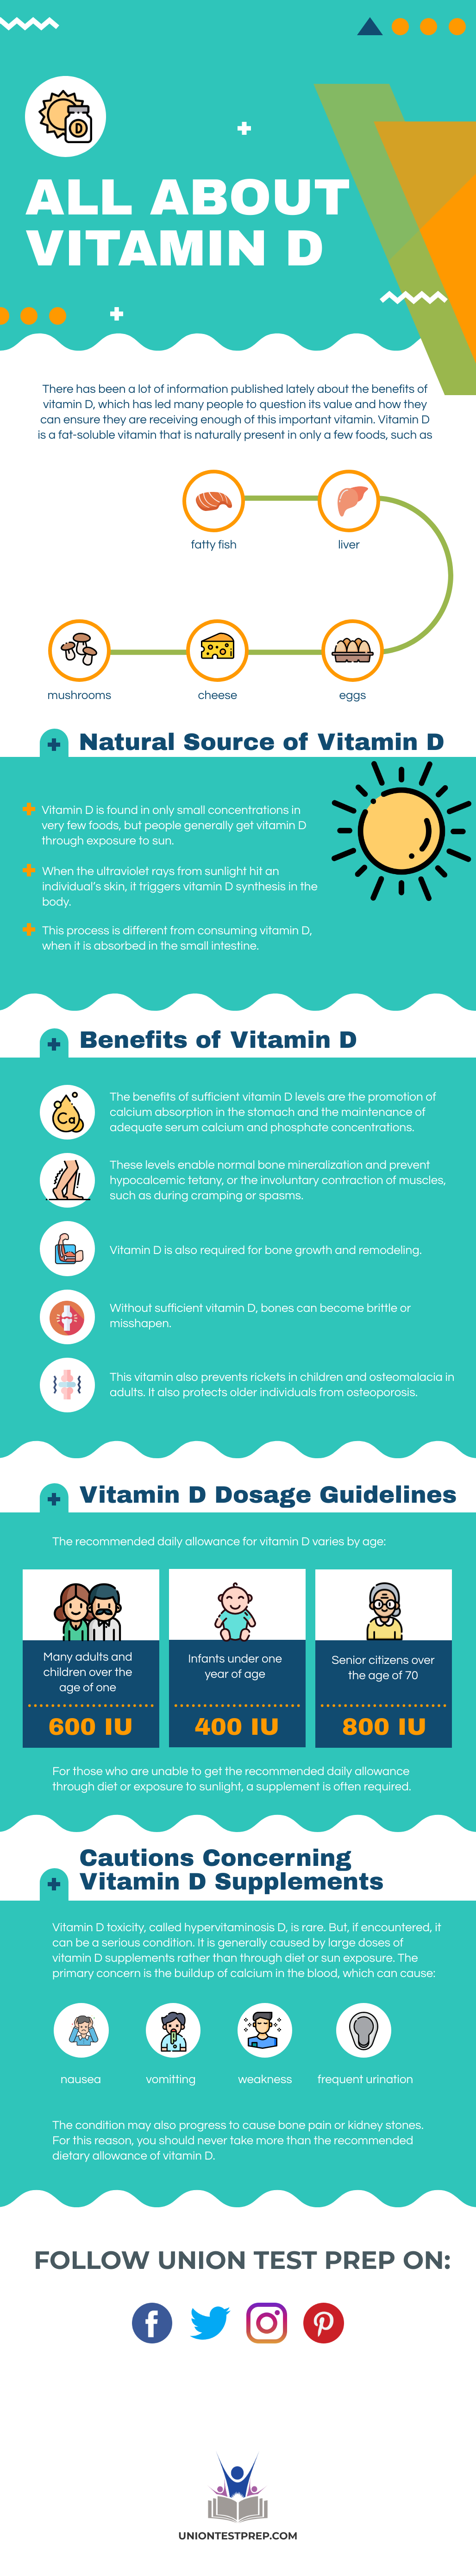 All About Vitamin D